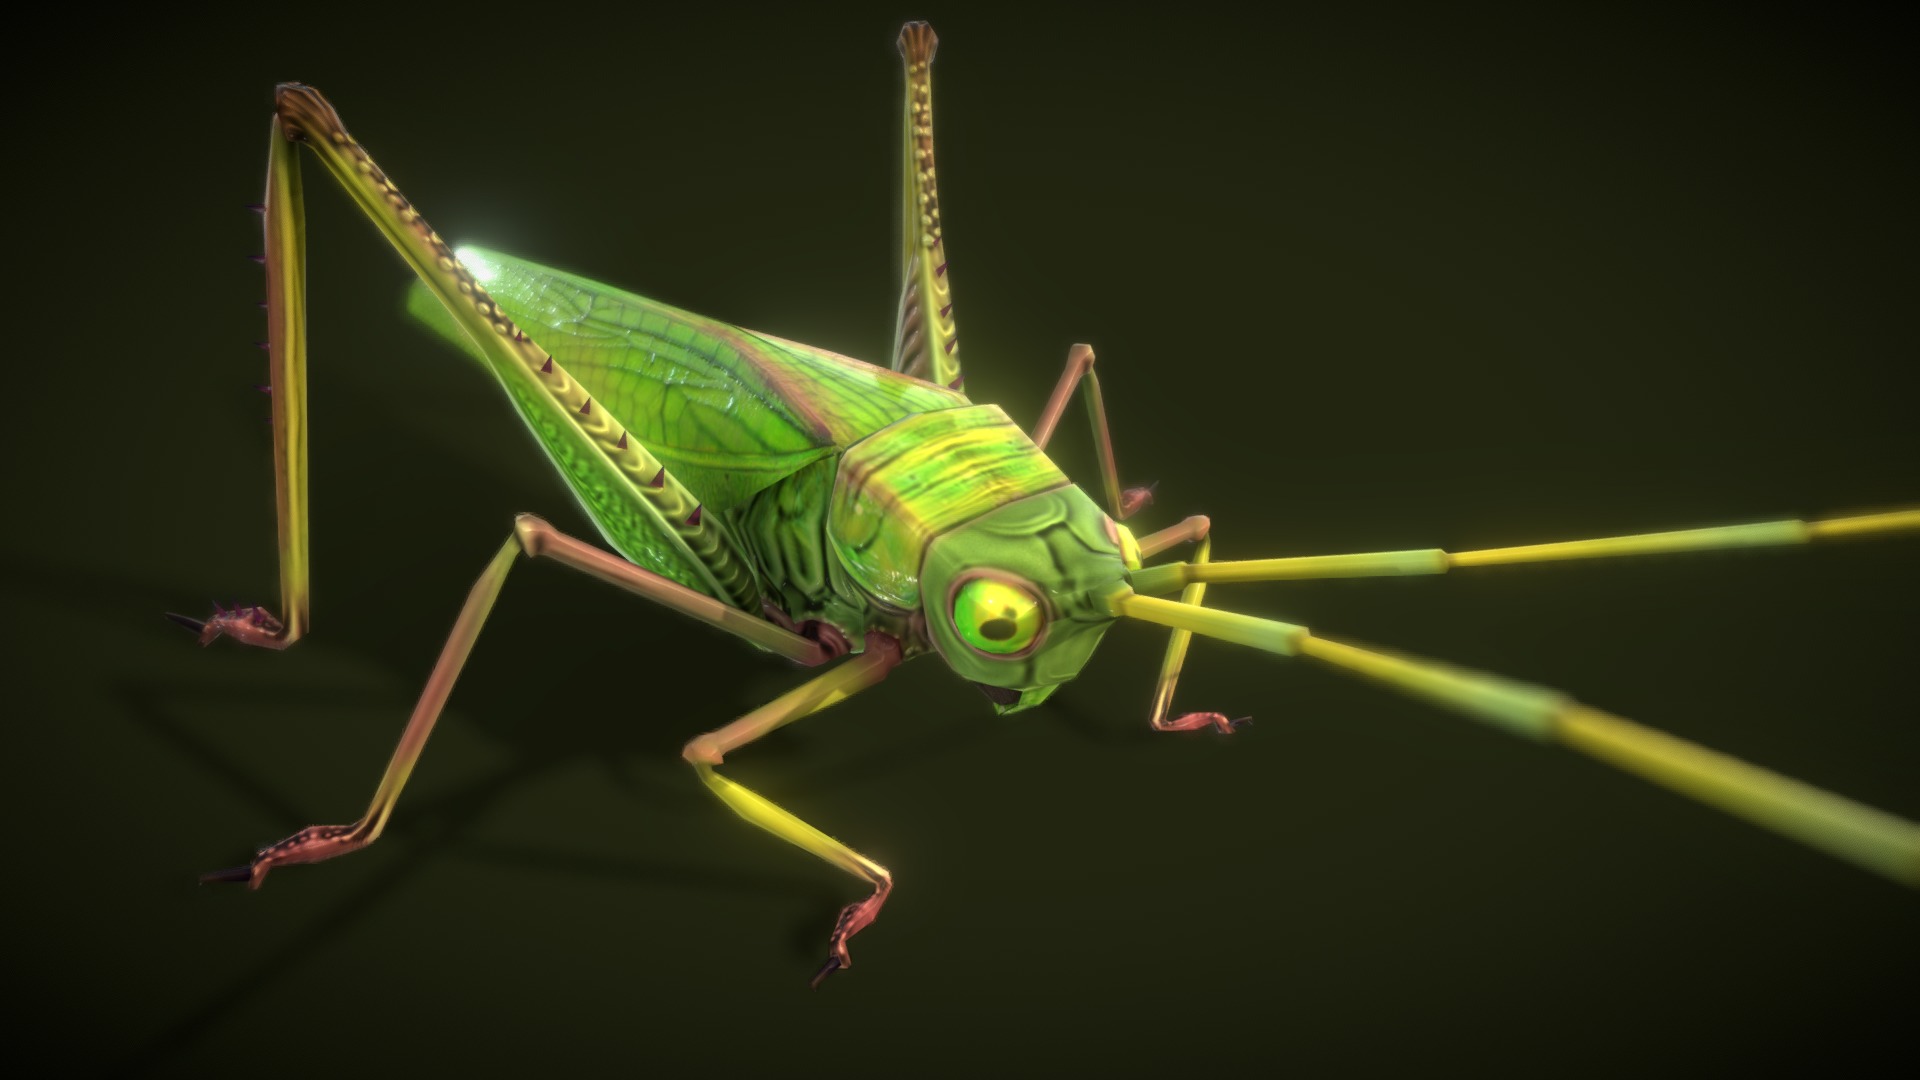 3D model Grasshopper Animals Lowpoly - This is a 3D model of the Grasshopper Animals Lowpoly. The 3D model is about a green insect with yellow eyes.